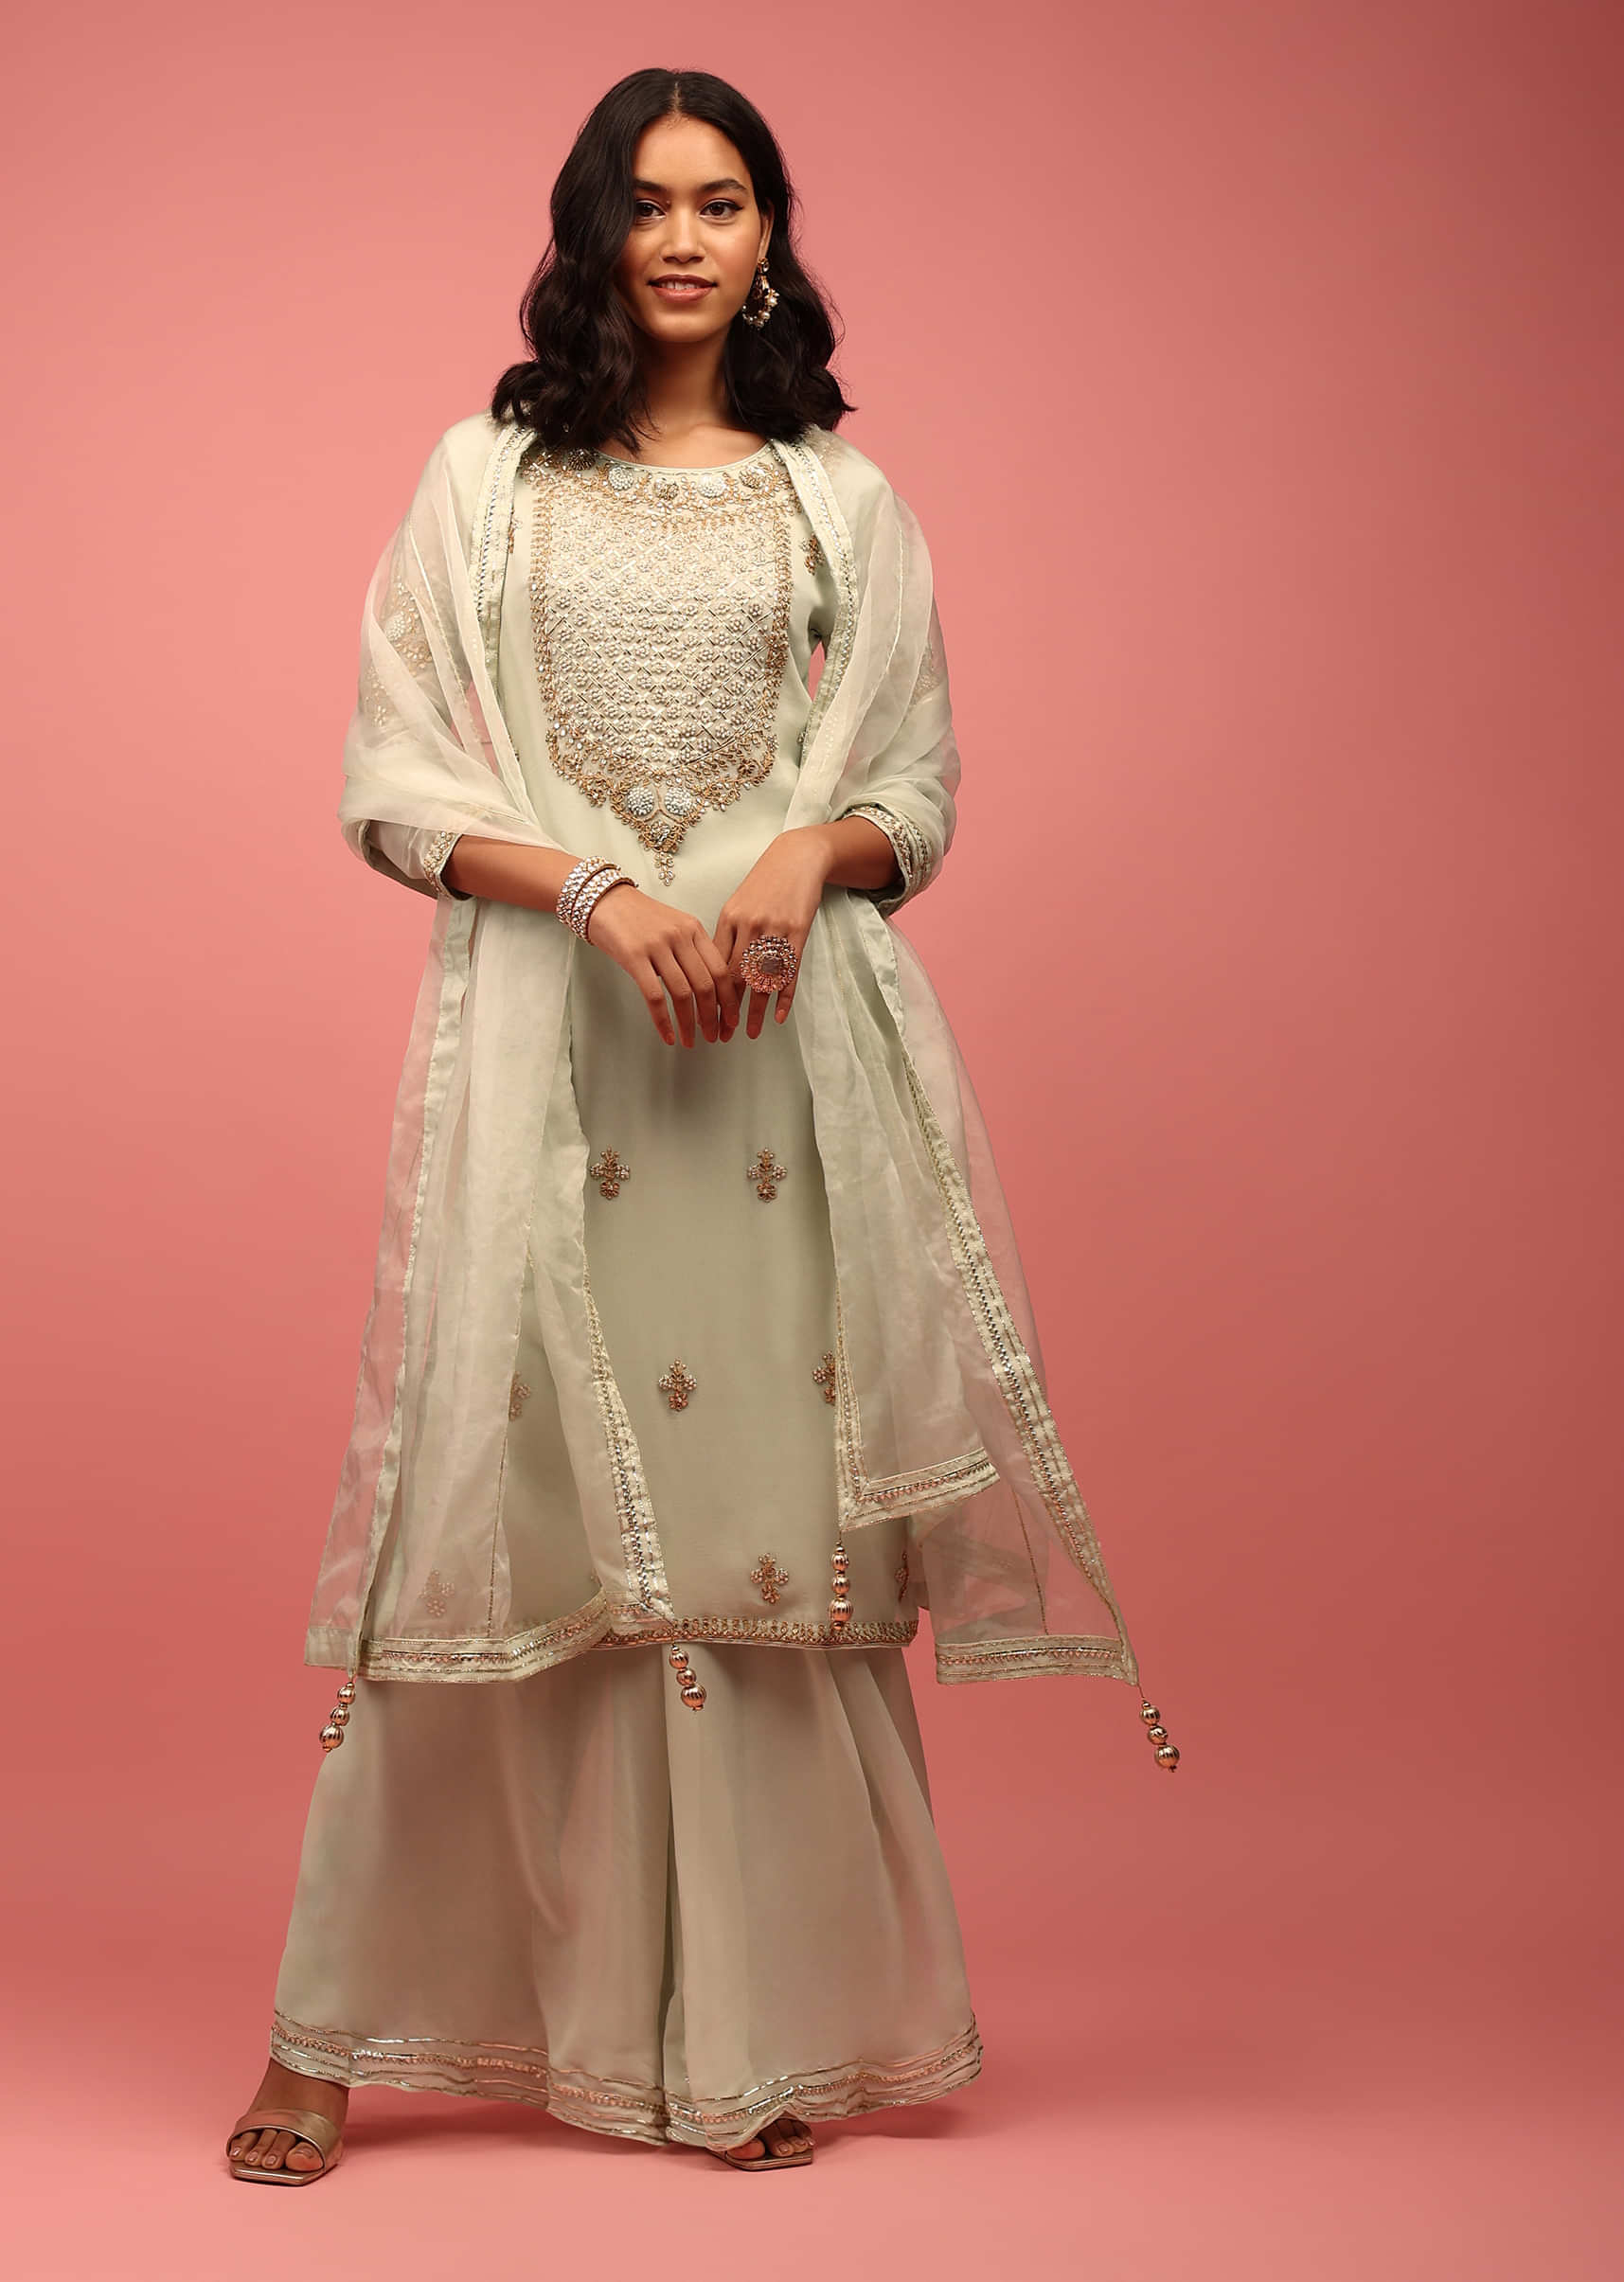 Light Green Palazzo Suit Hand Embroidered In Georgette With Zardosi, Sequins And Gotta Work